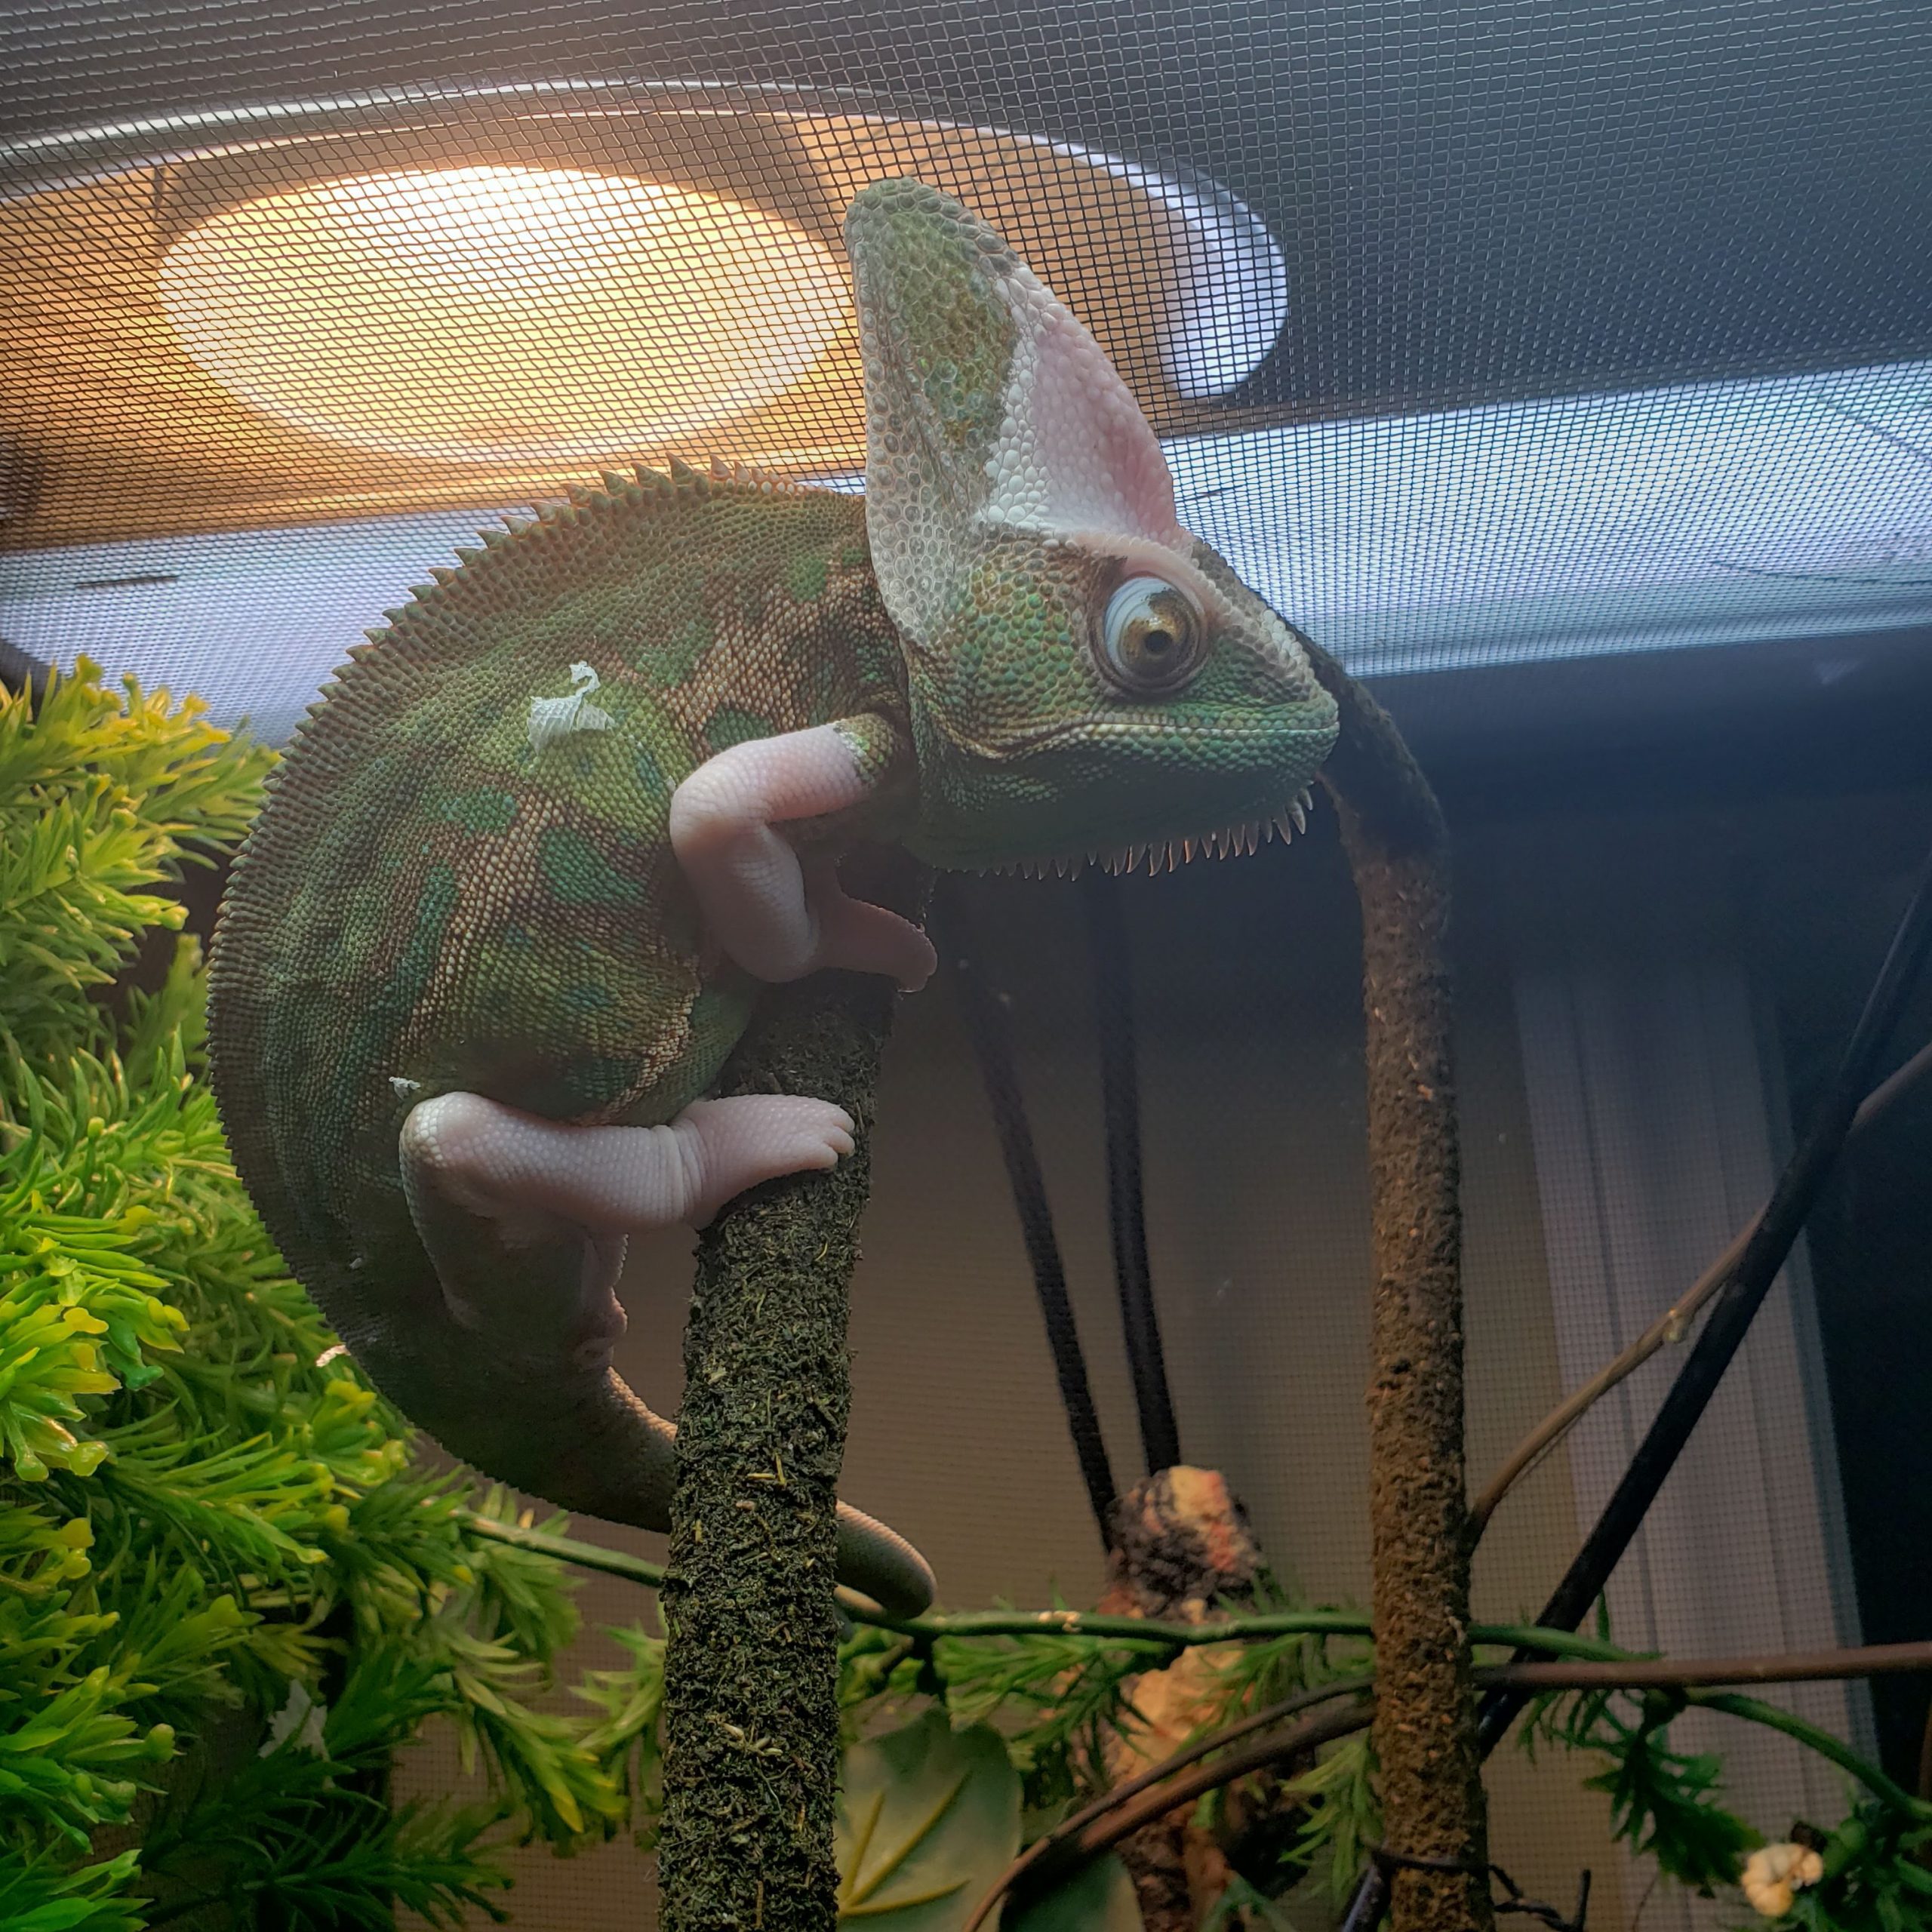 a chameleon on a branch in a cage under a heat light